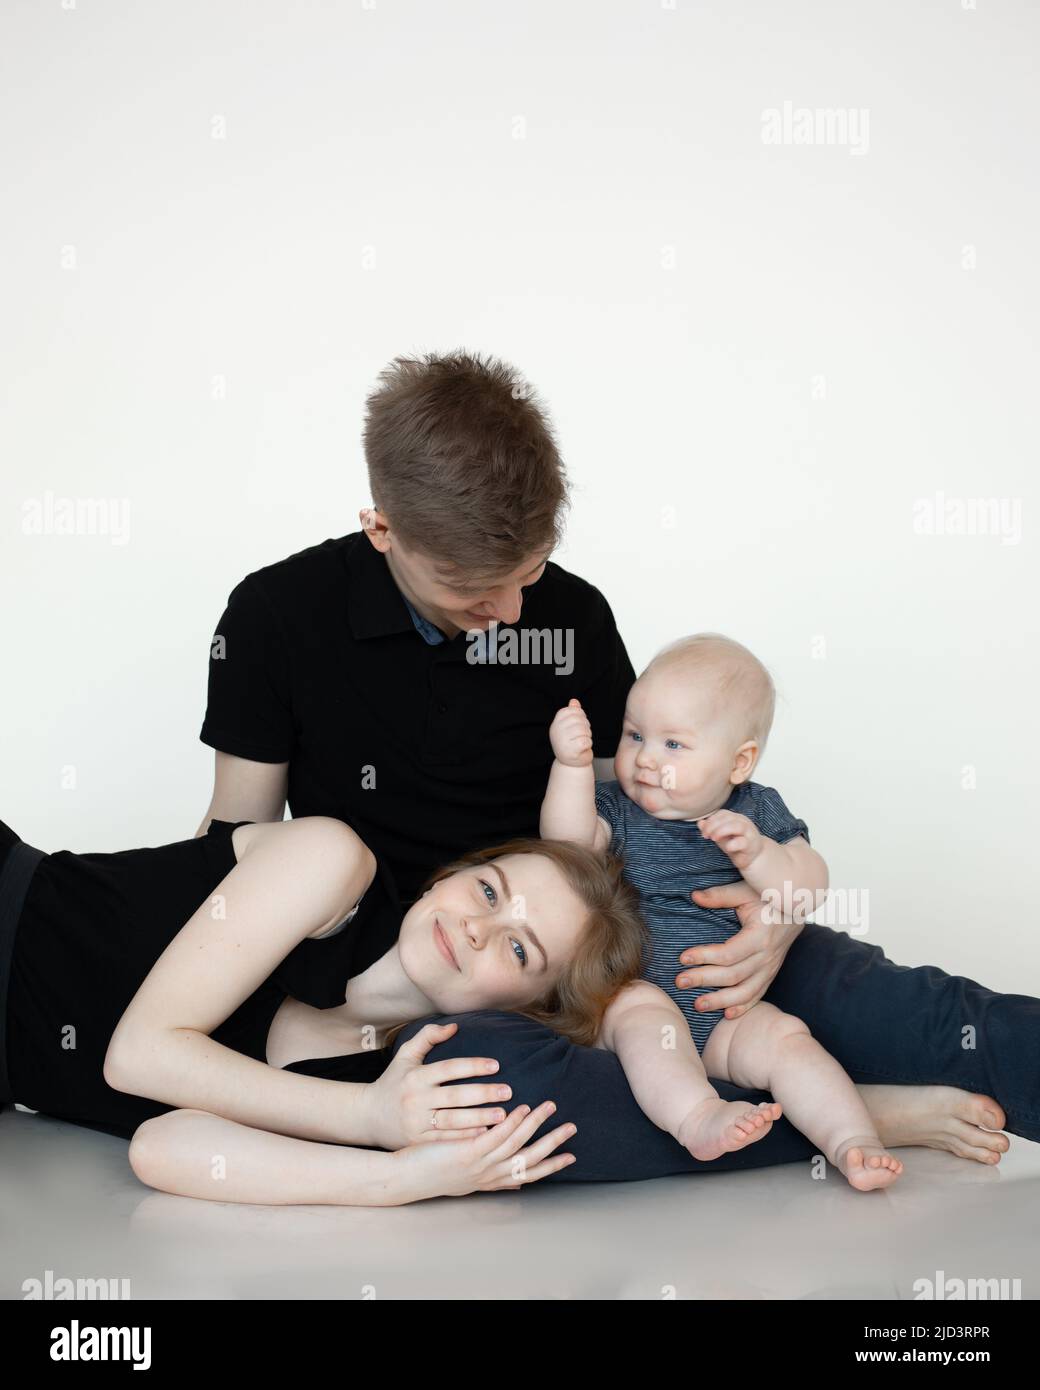 Young mom and dad sit and embrace with baby in dark clothes, smile and enjoy on white background. Cute relationship between parents and infant child Stock Photo